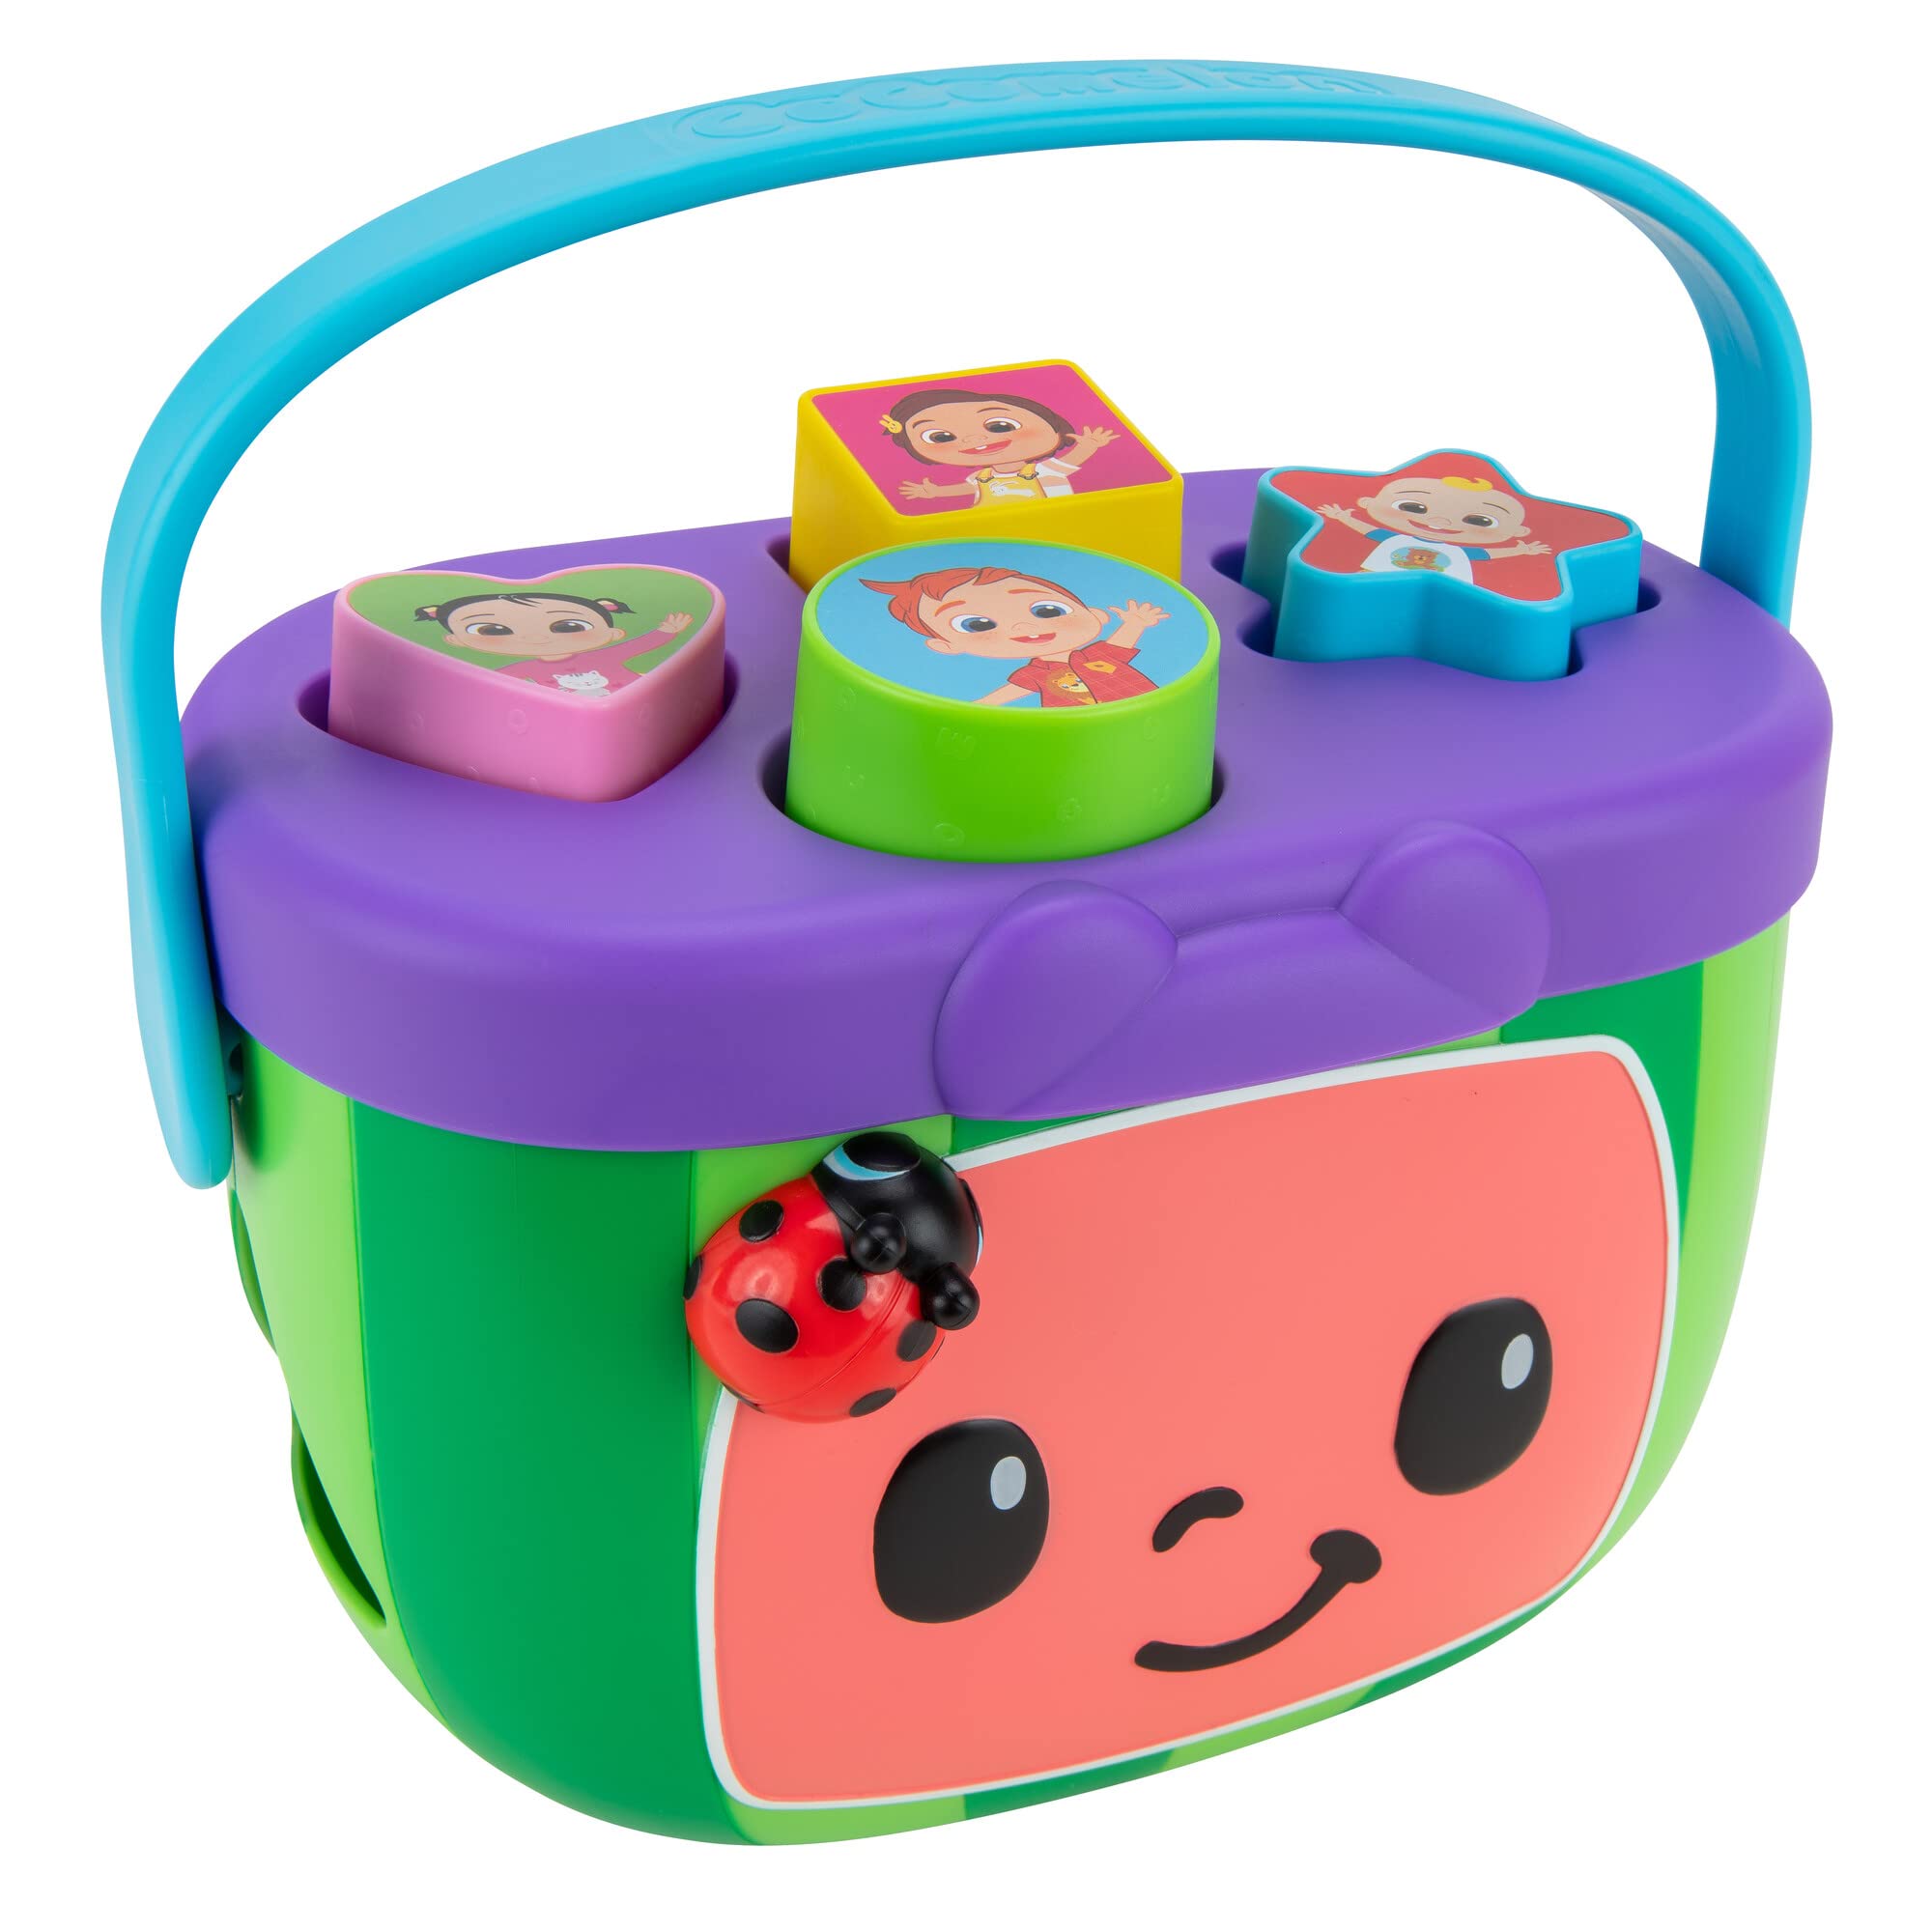 CoComelon Shape Sorter - Identify Shapes - Favorite Characters - Toys for Kids, Toddlers, and Preschoolers